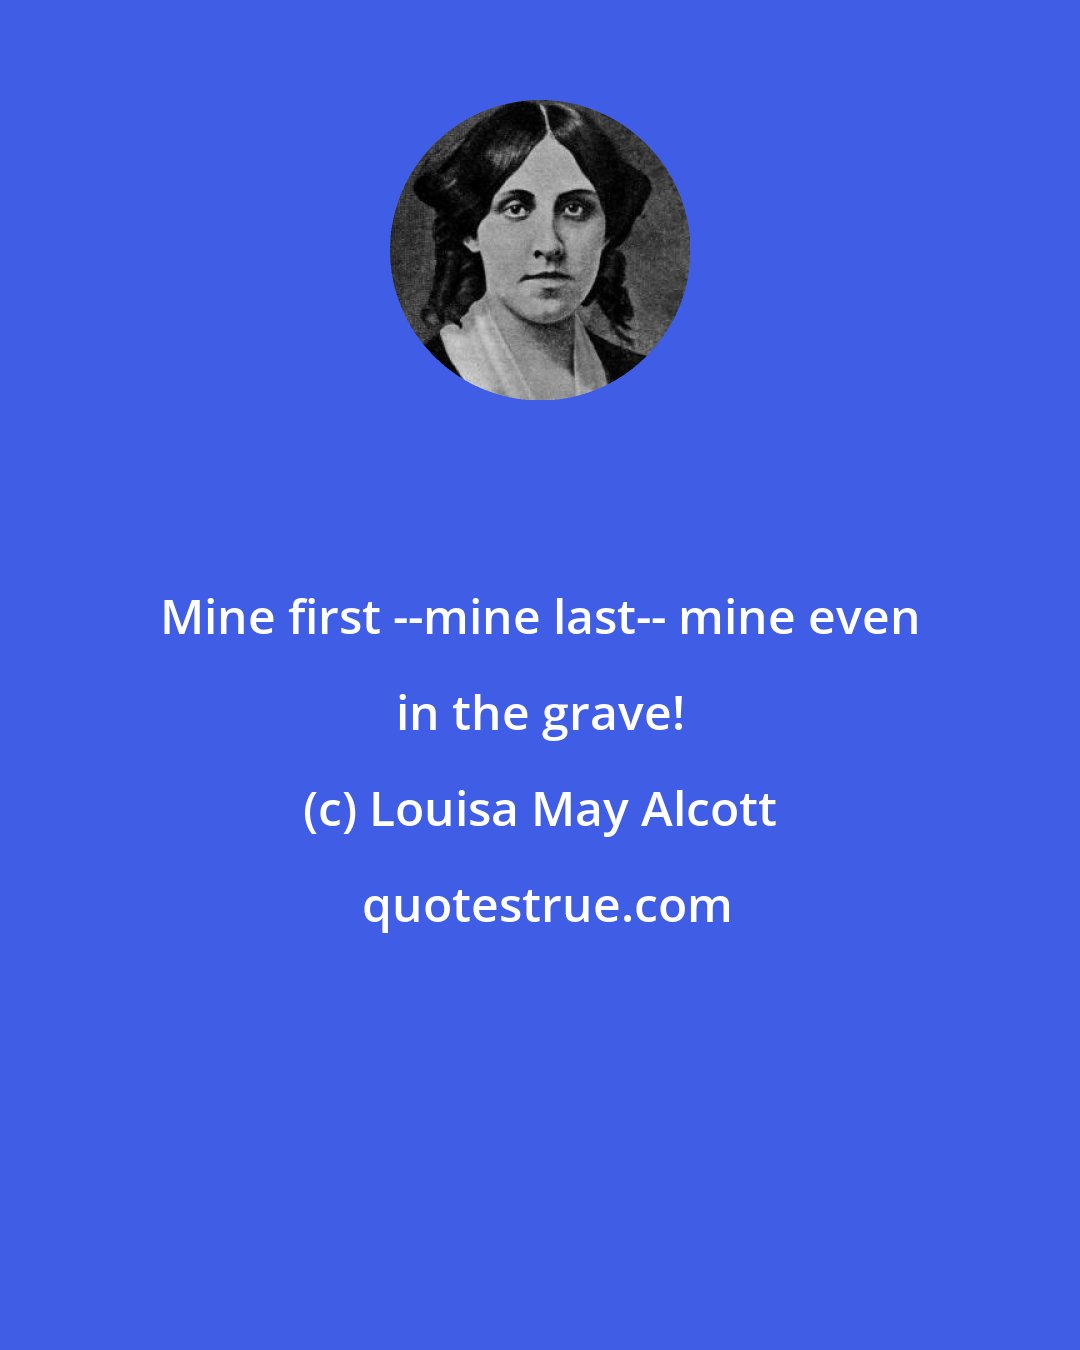 Louisa May Alcott: Mine first --mine last-- mine even in the grave!